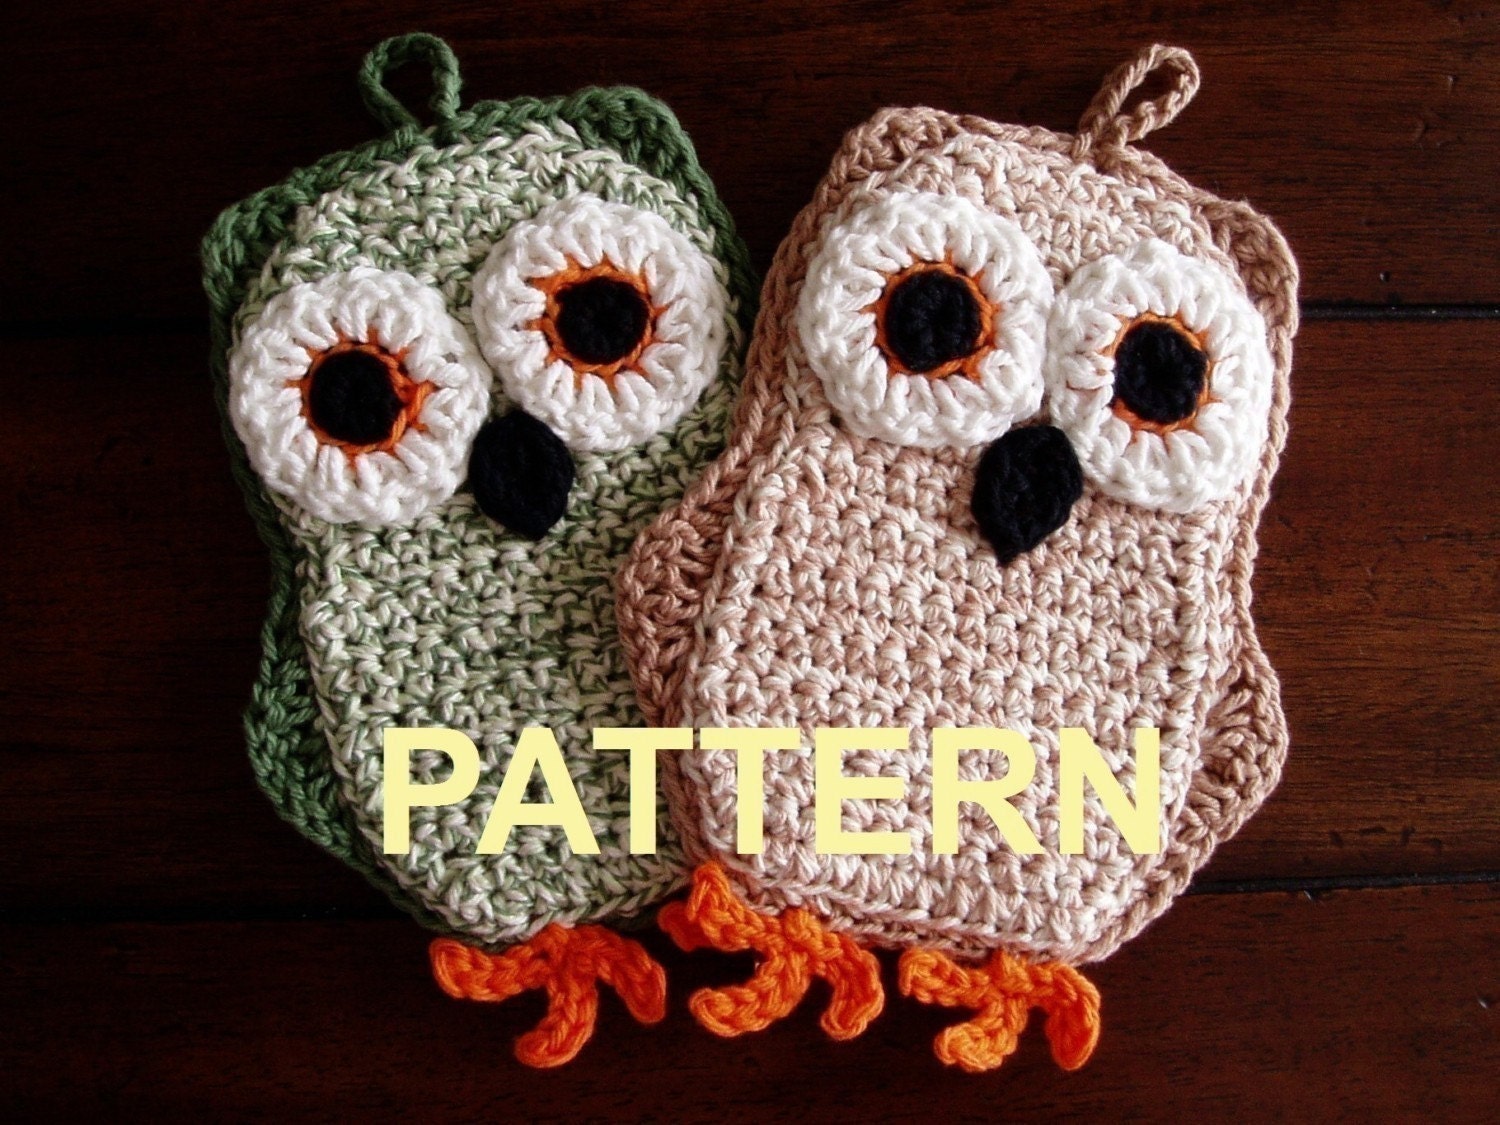 Crochet Patterns - Free projects and DIY gift ideas from Craftbits.com